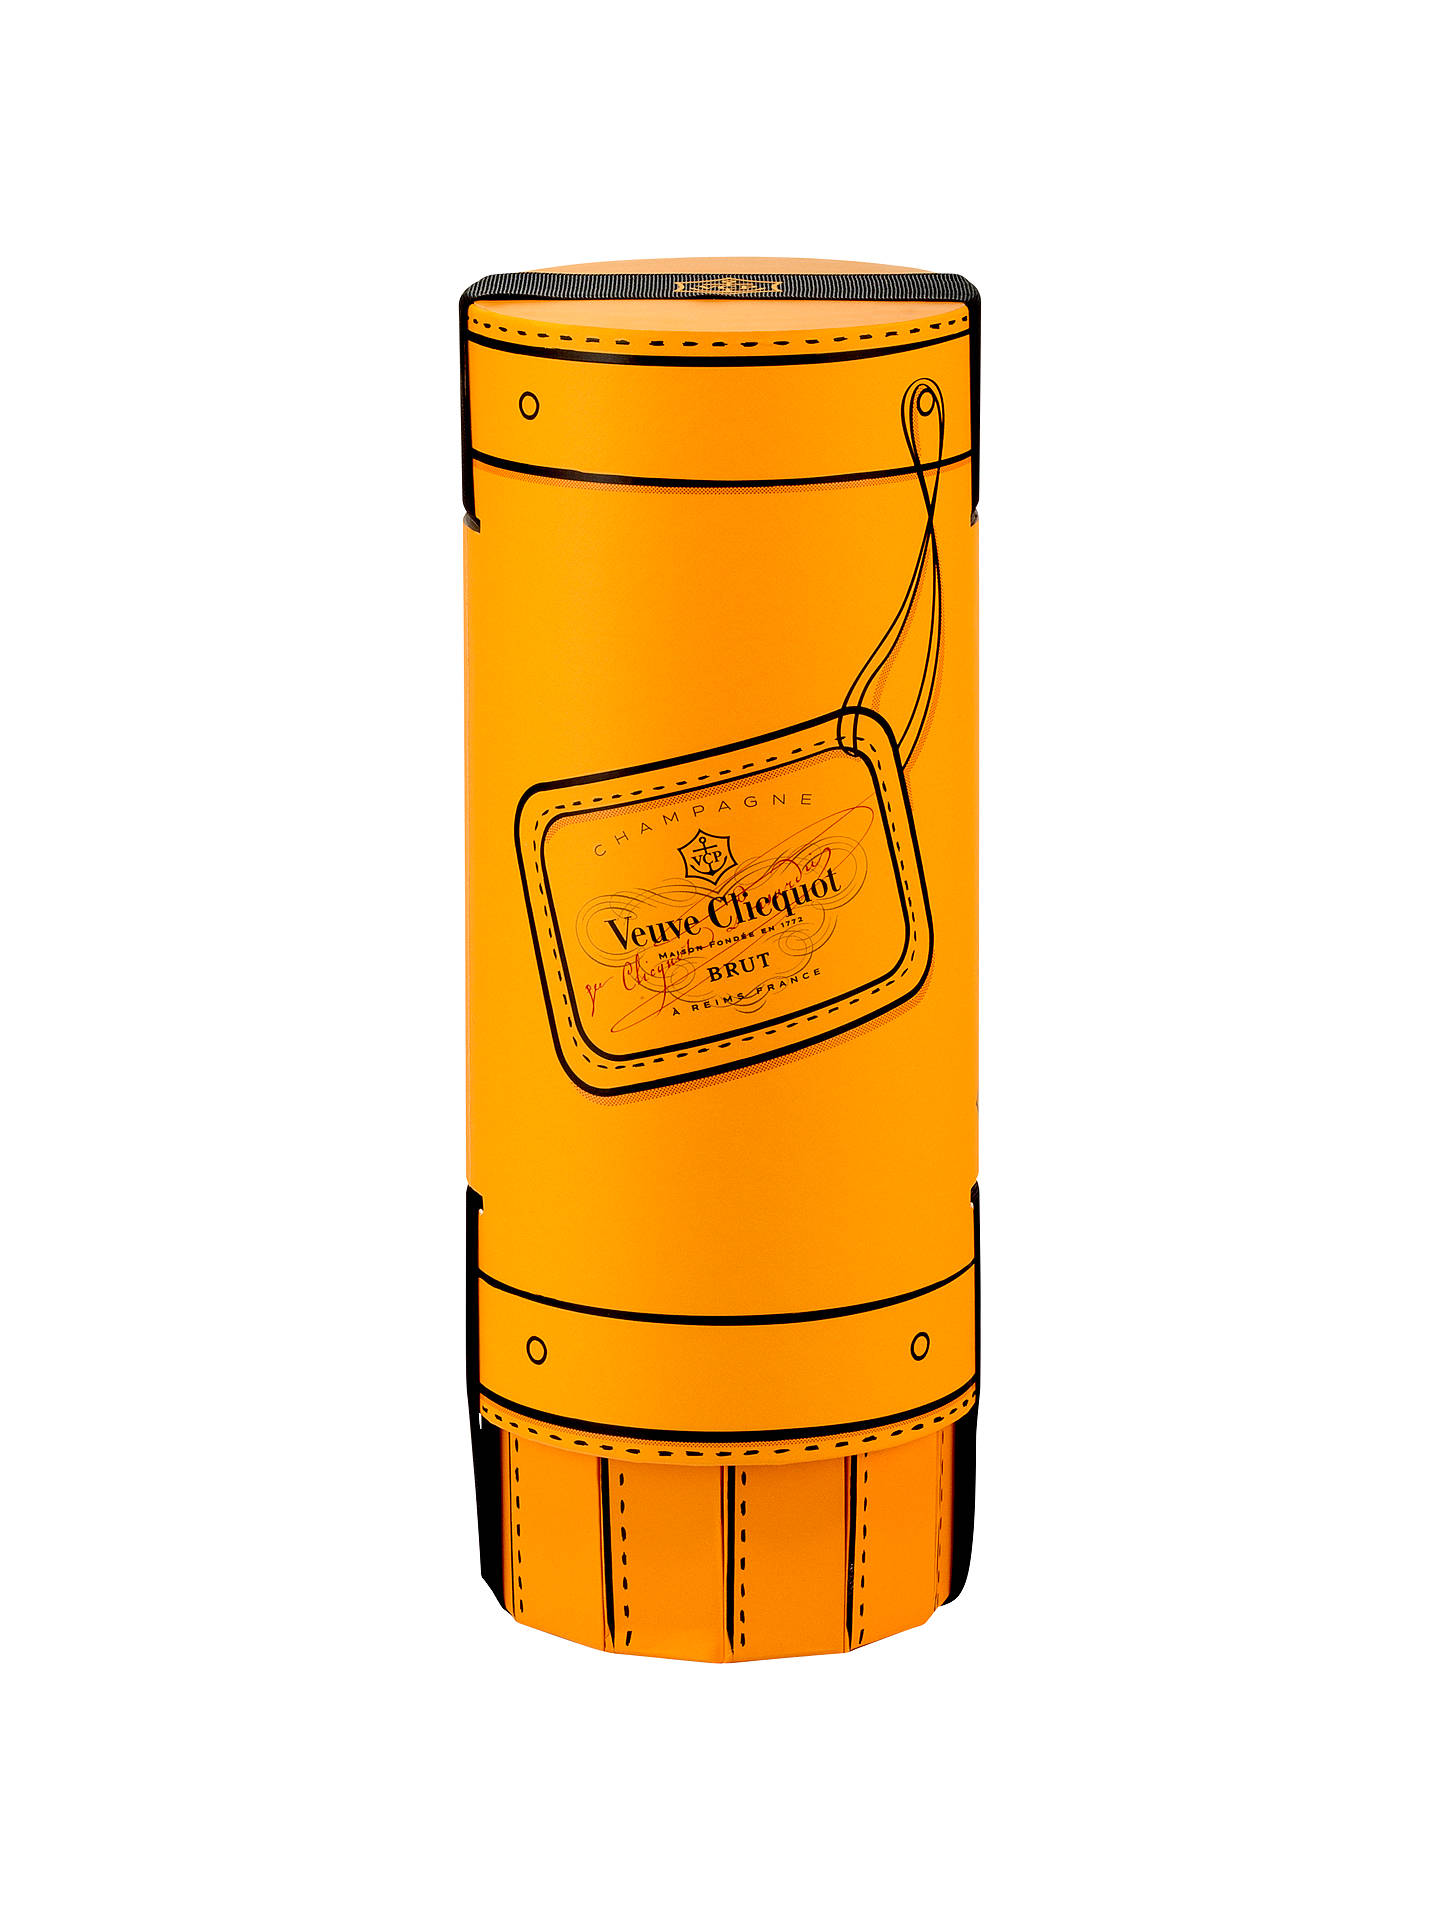 Veuve Clicqout Yellow Label Champagne Brut, 75cl at John